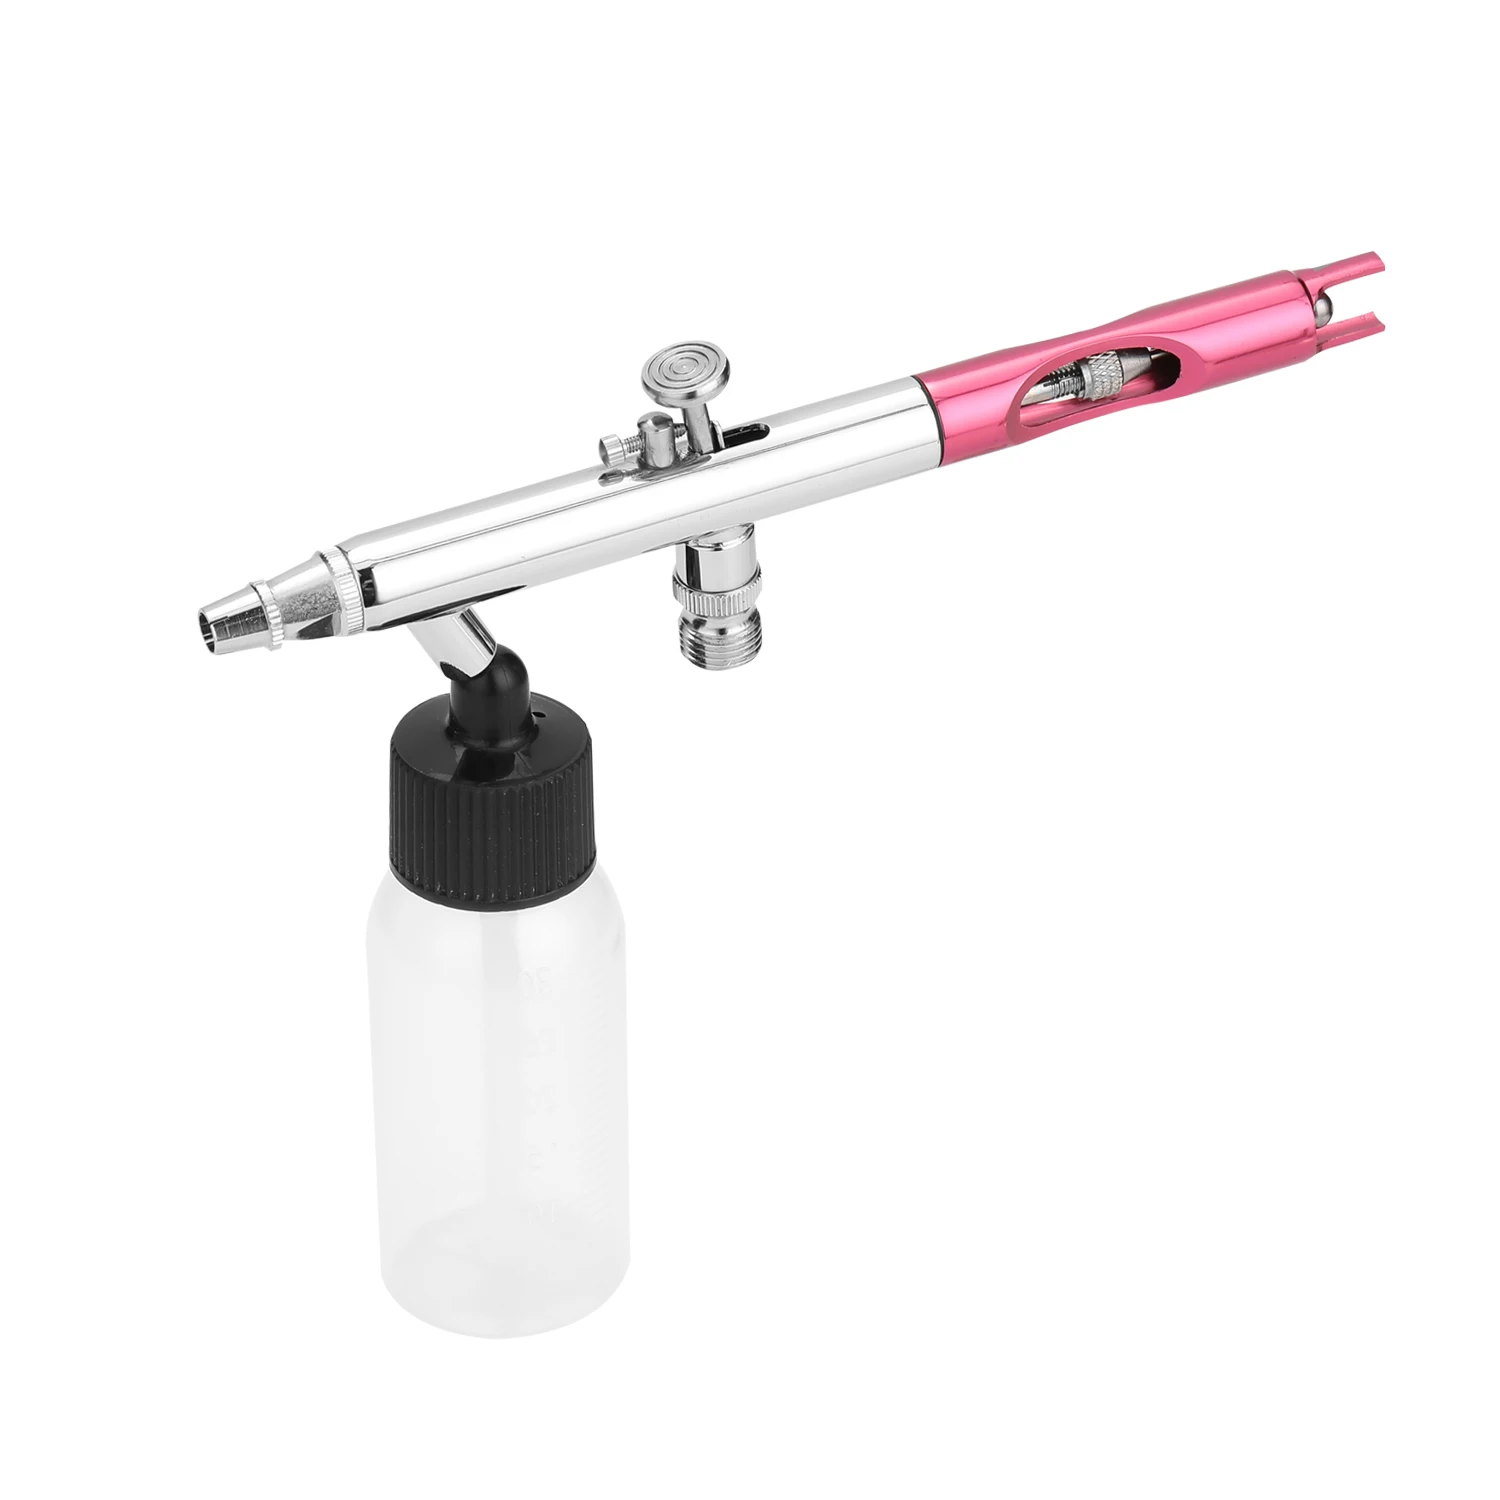 

Professional 0.35mm Airbrush Set for Model Making Art Painting with G1/8 Adapter Wrentch 2 Fluid Cups Pen Cap and Metal Holder